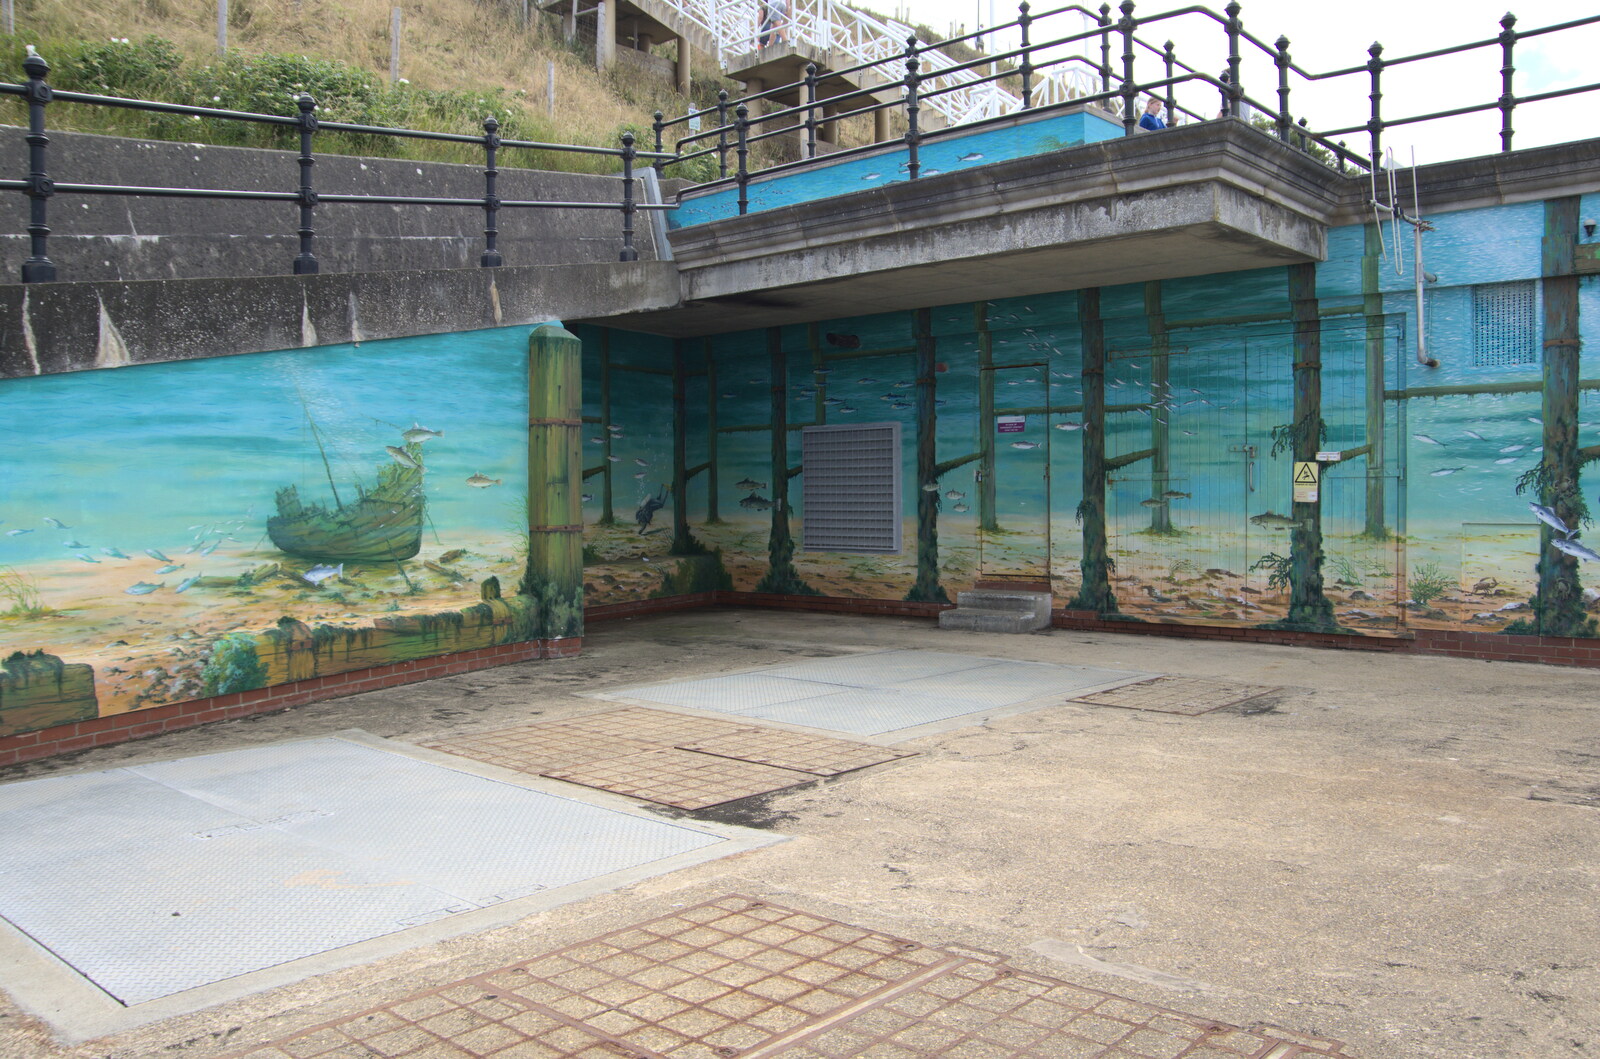 Wall murals from Camping on the Coast, East Runton, North Norfolk - 25th July 2020